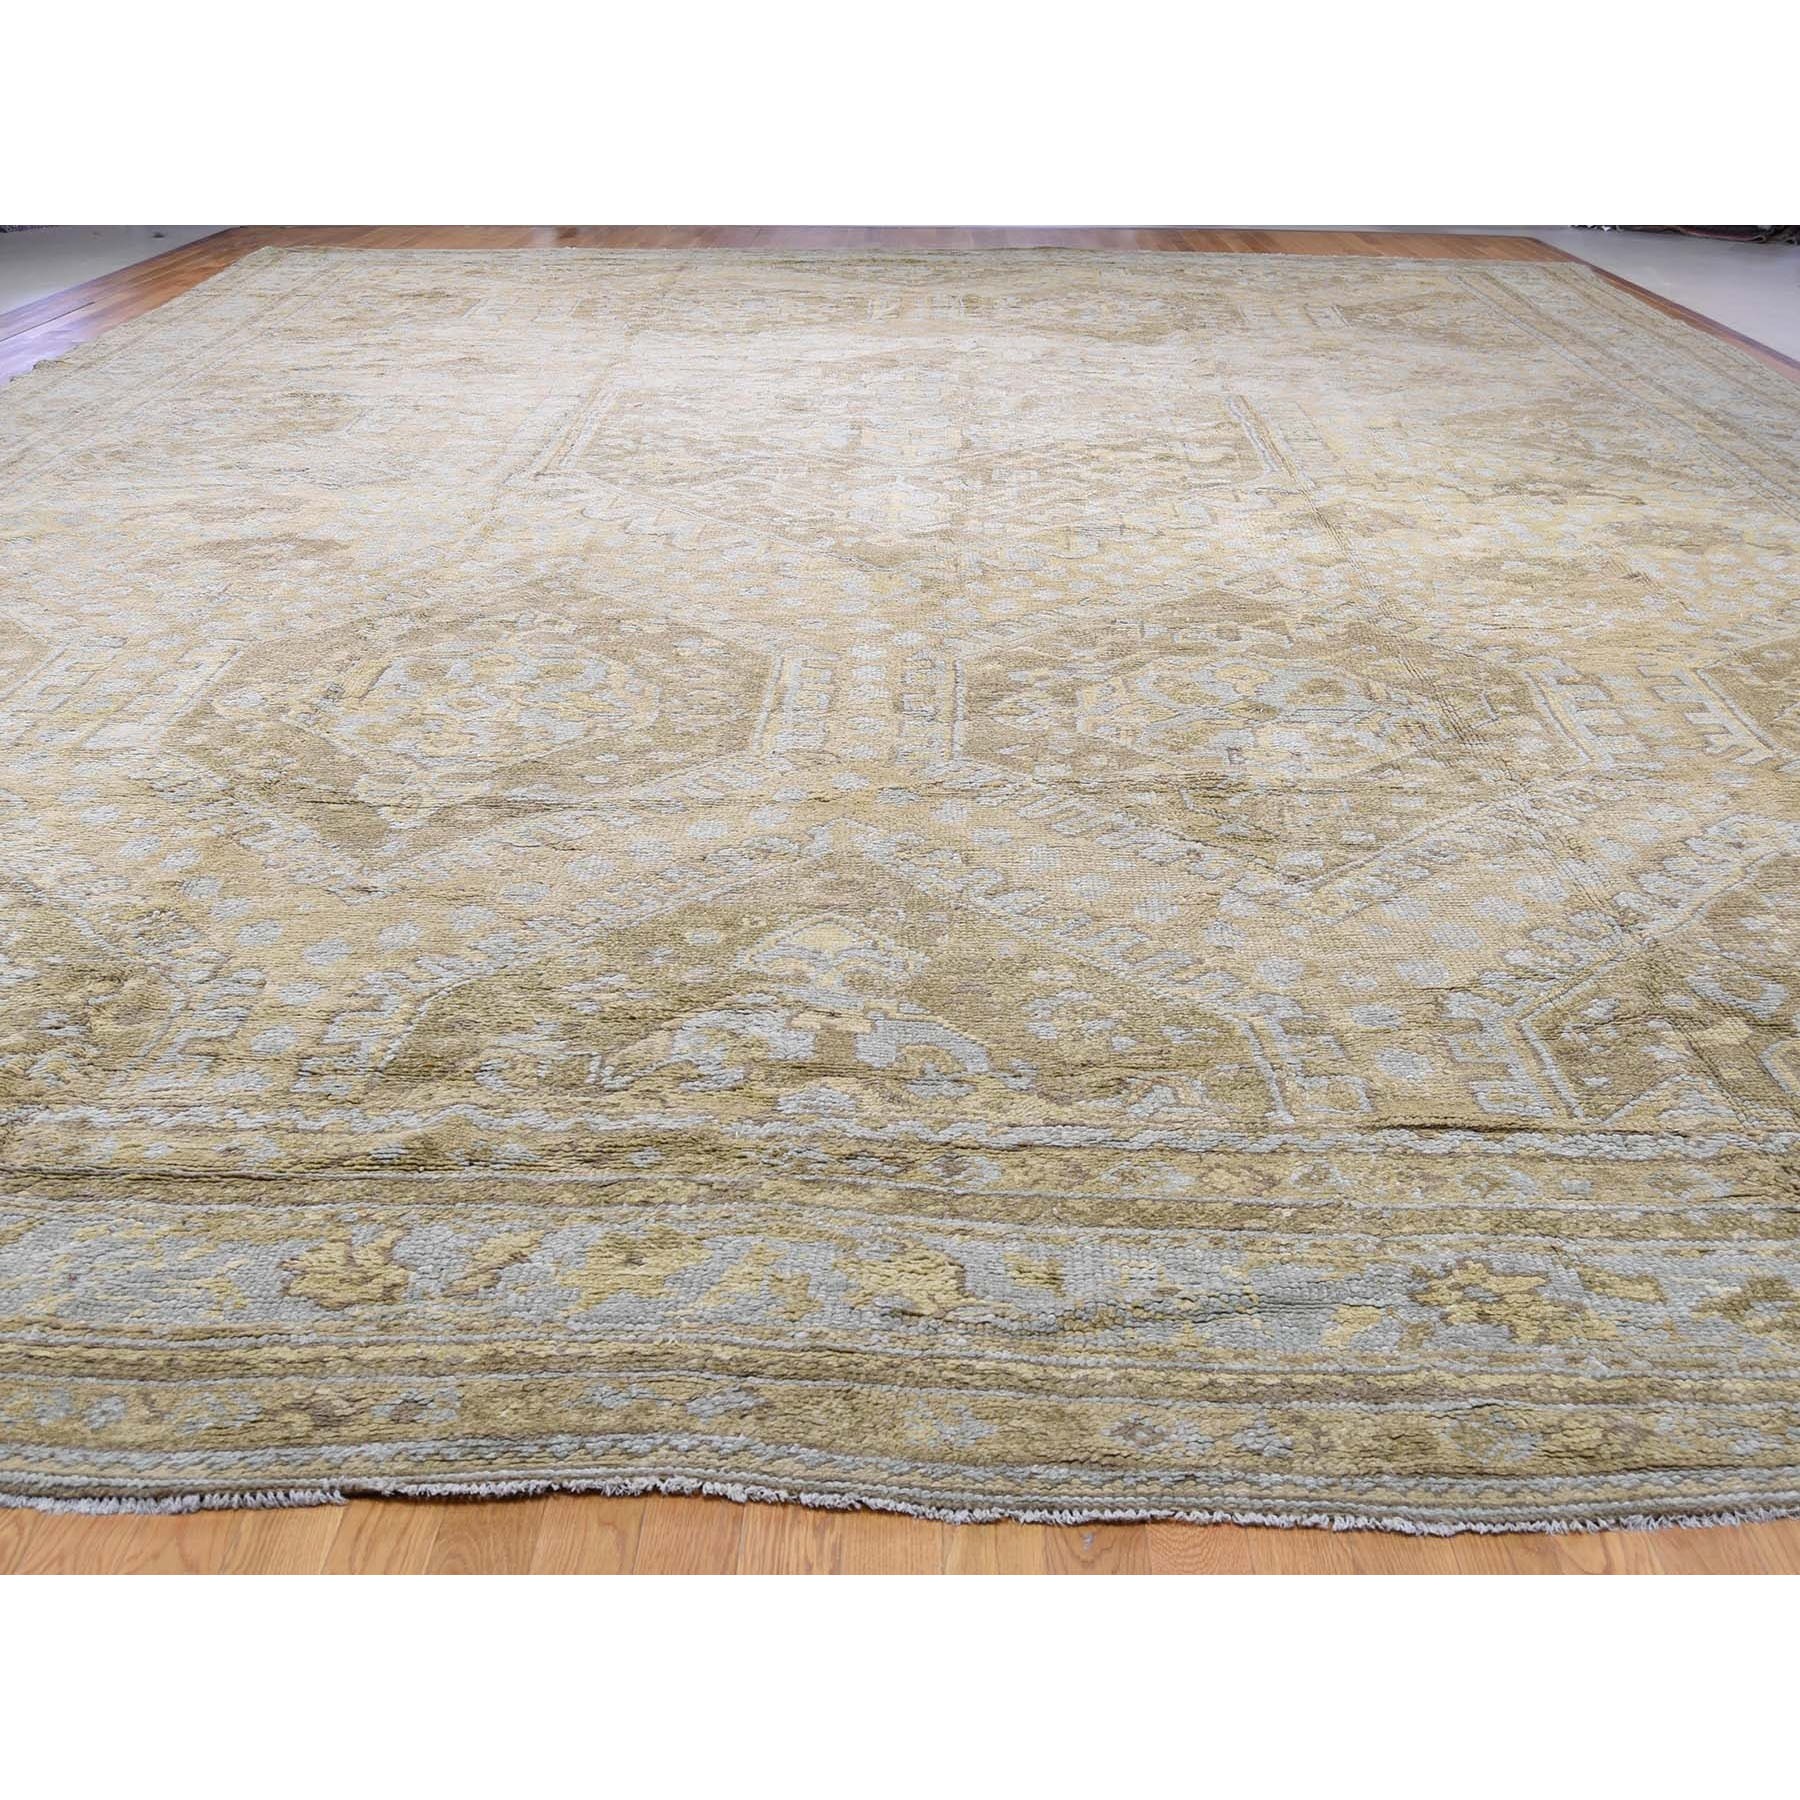 19-2--x24-7-- Hand-Knotted Antique Turkish Oushak Exc Cond Oversize Oriental Rug 